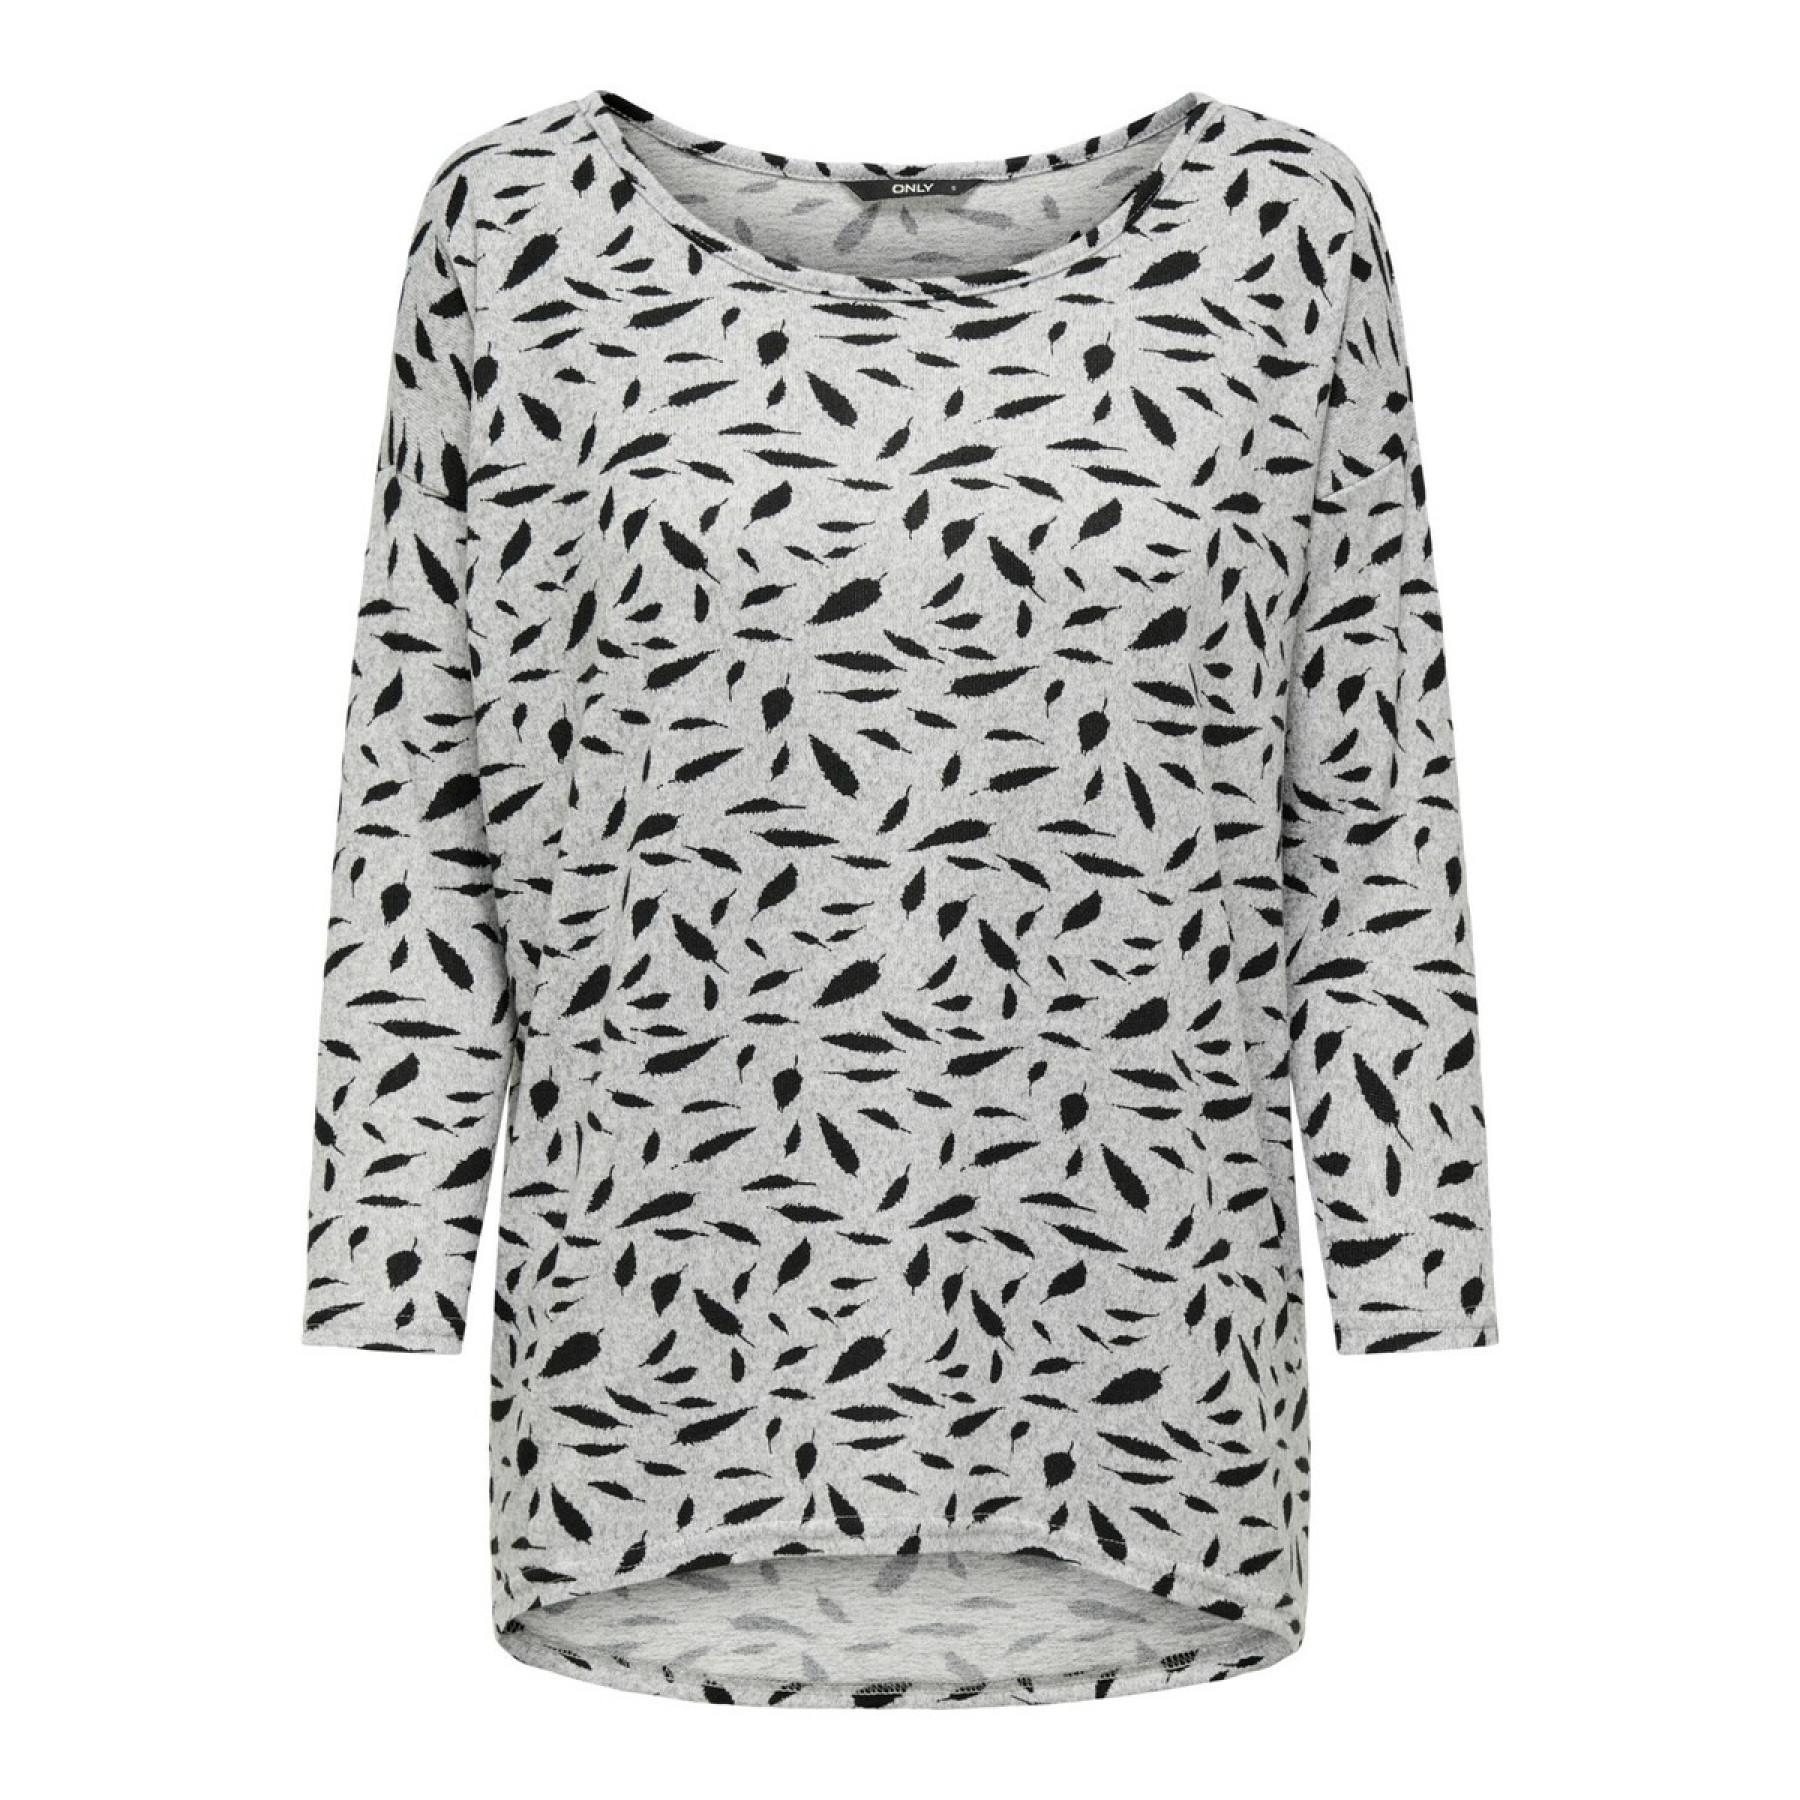 Women's T-shirt Only Elcos manches 4/5